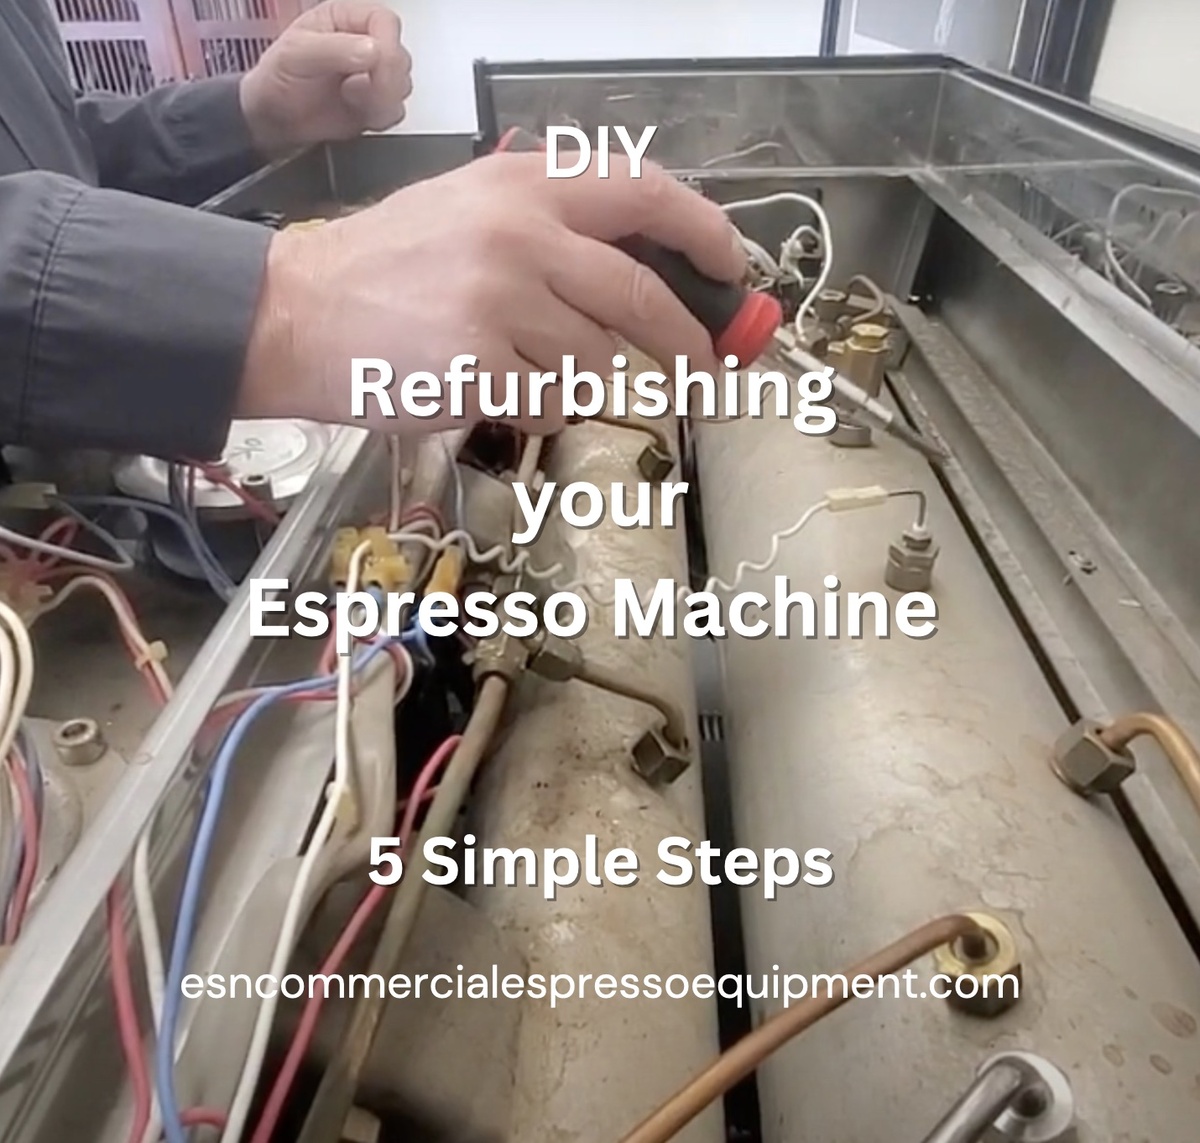 Learn the 5 Steps to Refurbishing Your Own Espresso Machine